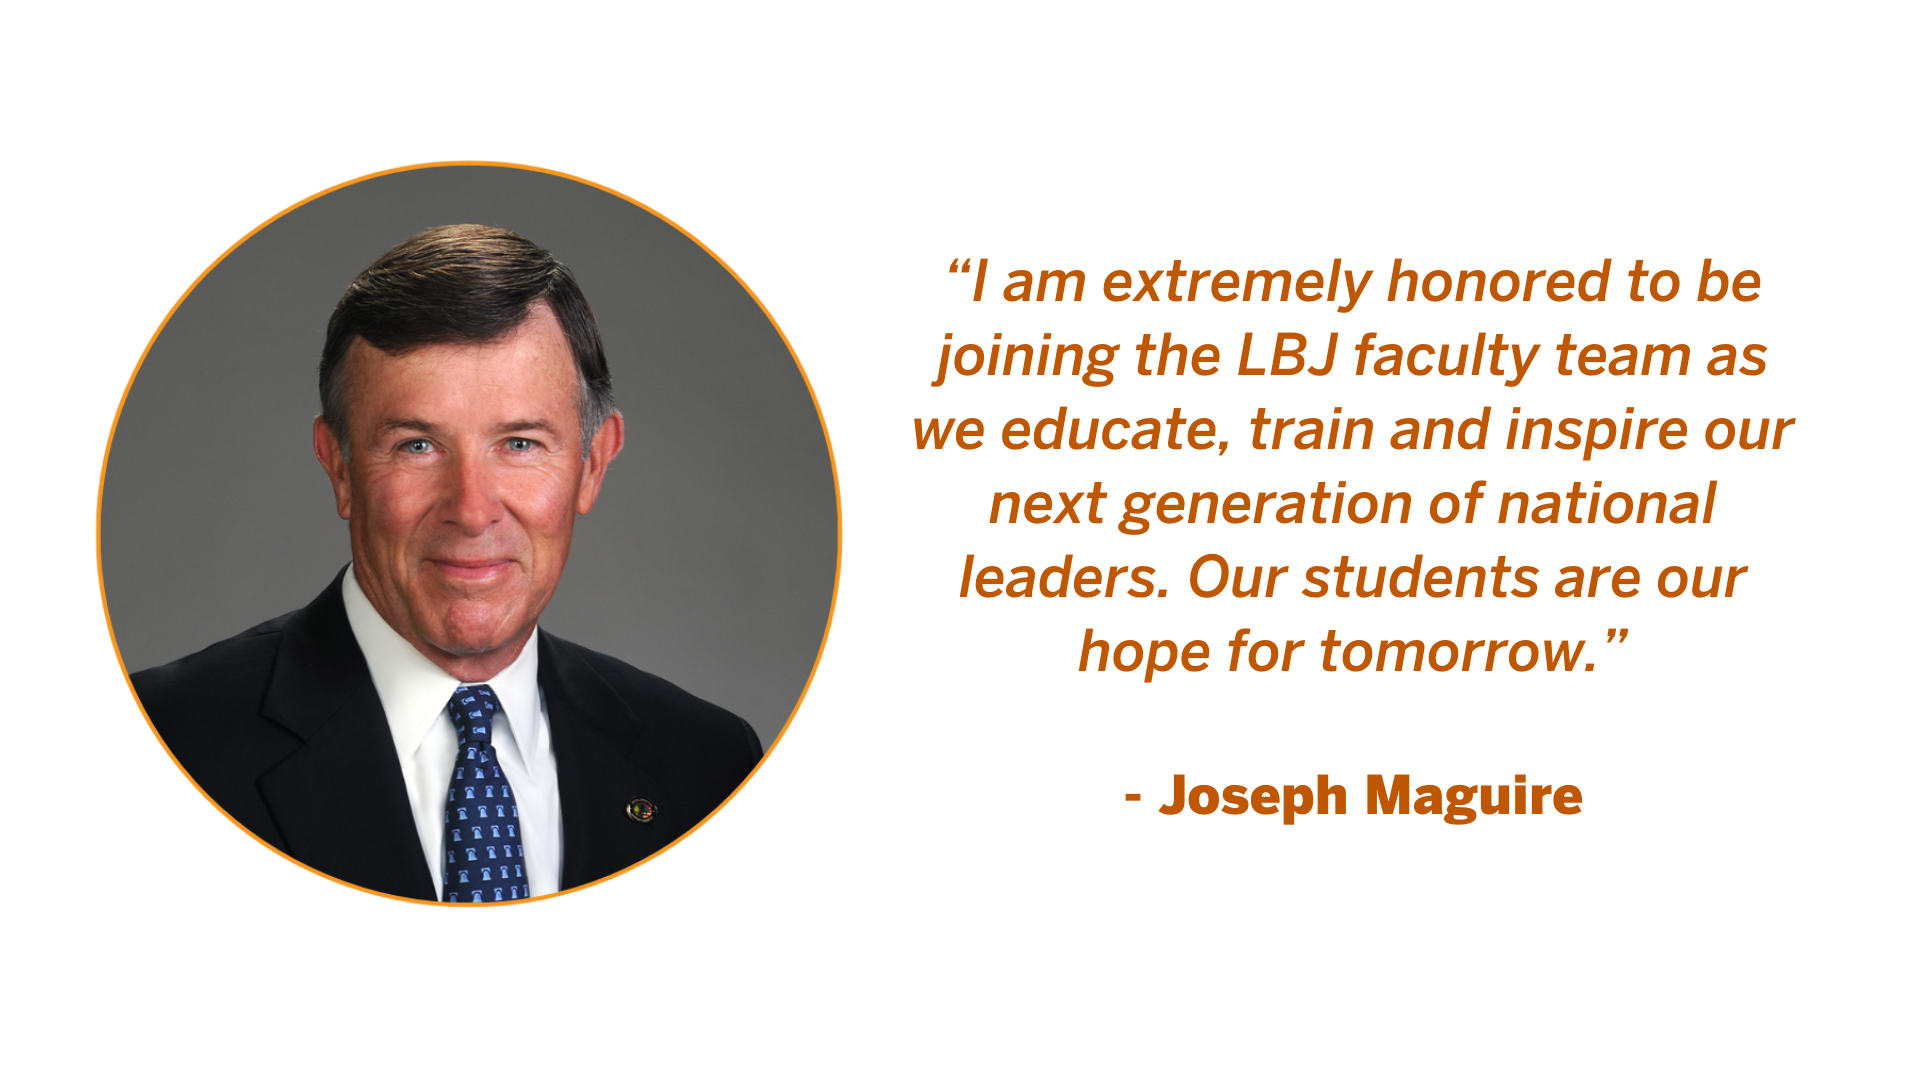 Quote from Joseph Maguire: "I am extremely honored to be joining the LBJ faculty team as we educate, train and inspire our next generation of national leaders. Our students are our hope for tomorrow."